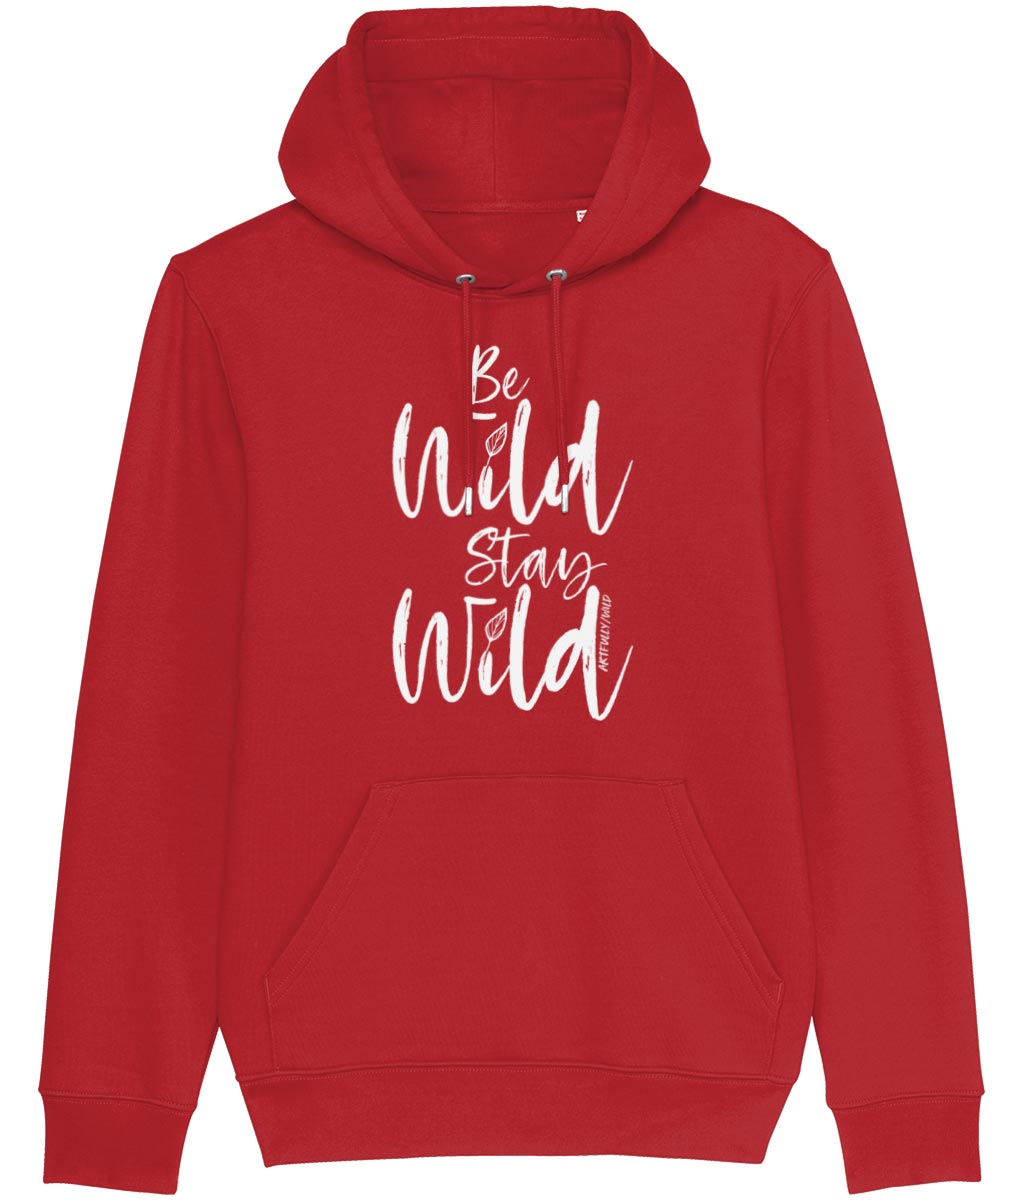 ‘BE WILD STAY WILD’ Classic Bright Red Hoodie. Unisex/Men/Women. Made with Certified Organic Cotton. Printed in UK with water-based Inks. Sustainable Eco-friendly Clothing. Original Illustration by Artfully/Wild.